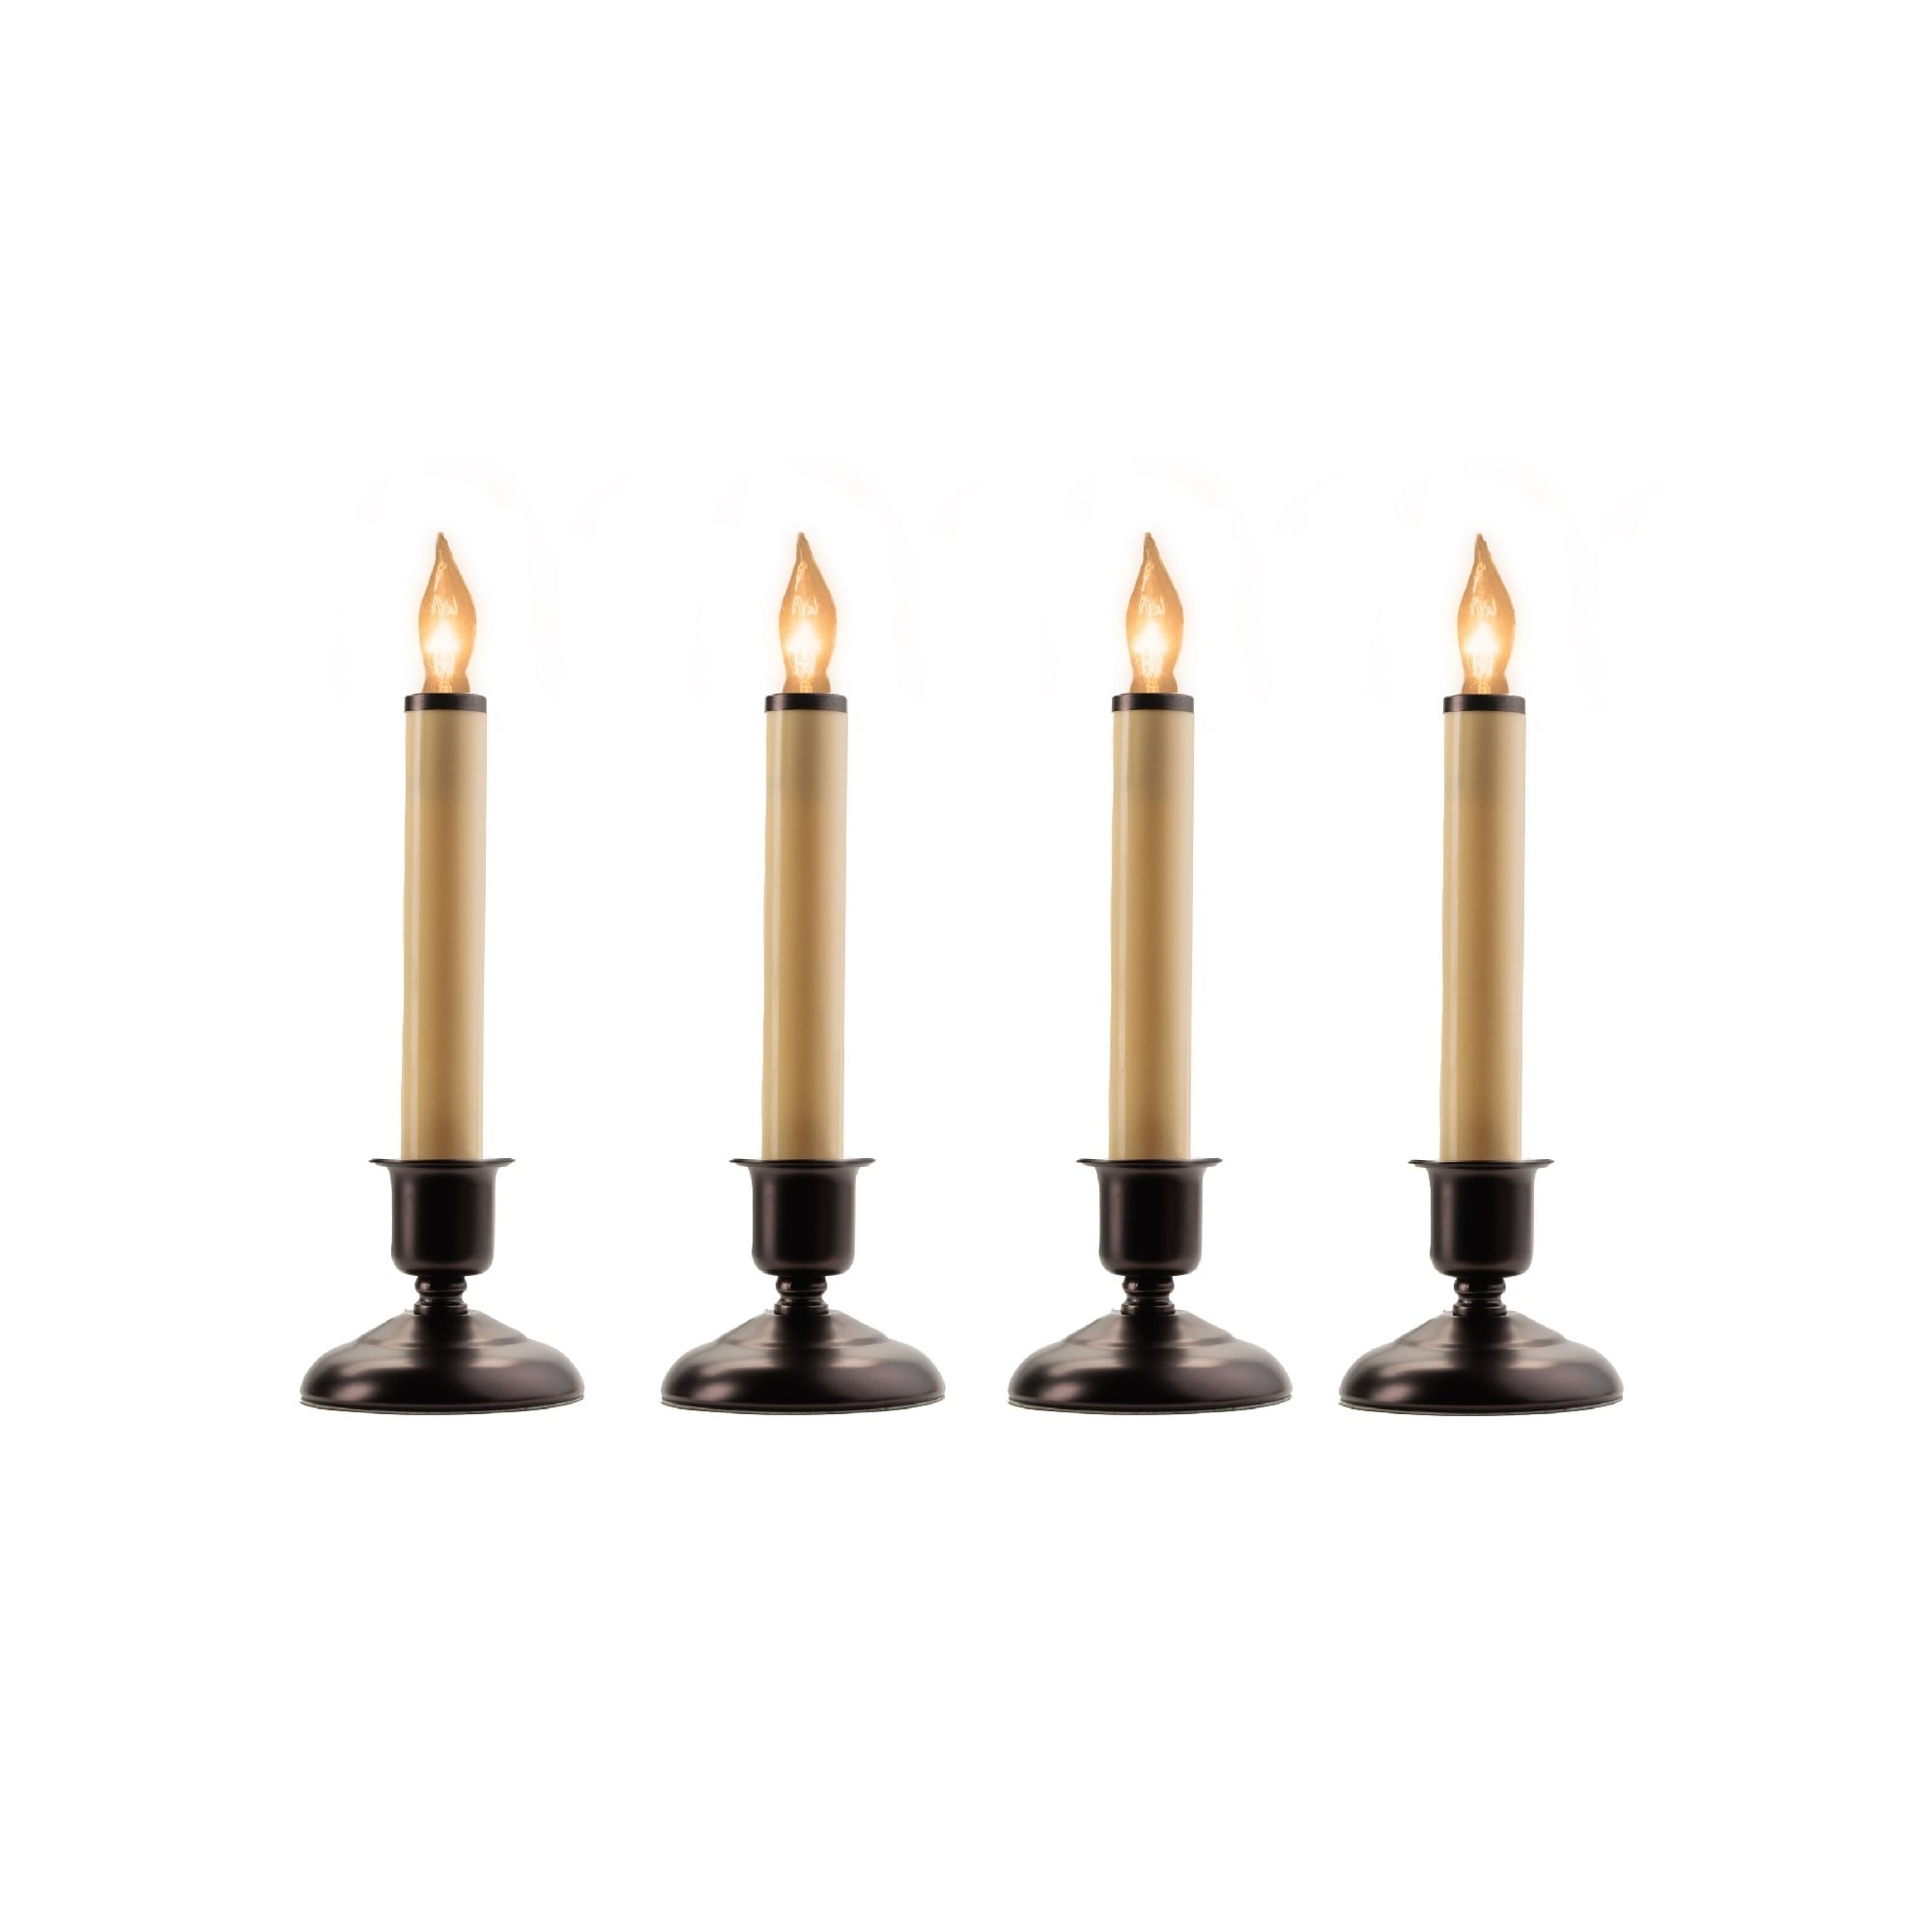 https://ak1.ostkcdn.com/images/products/is/images/direct/e3af250a83a270a2108483a795ad8ebebee1d52f/Set-of-4-Christmas-Window-Candle-Lamps-with-Weighted-Base-9%22.jpg